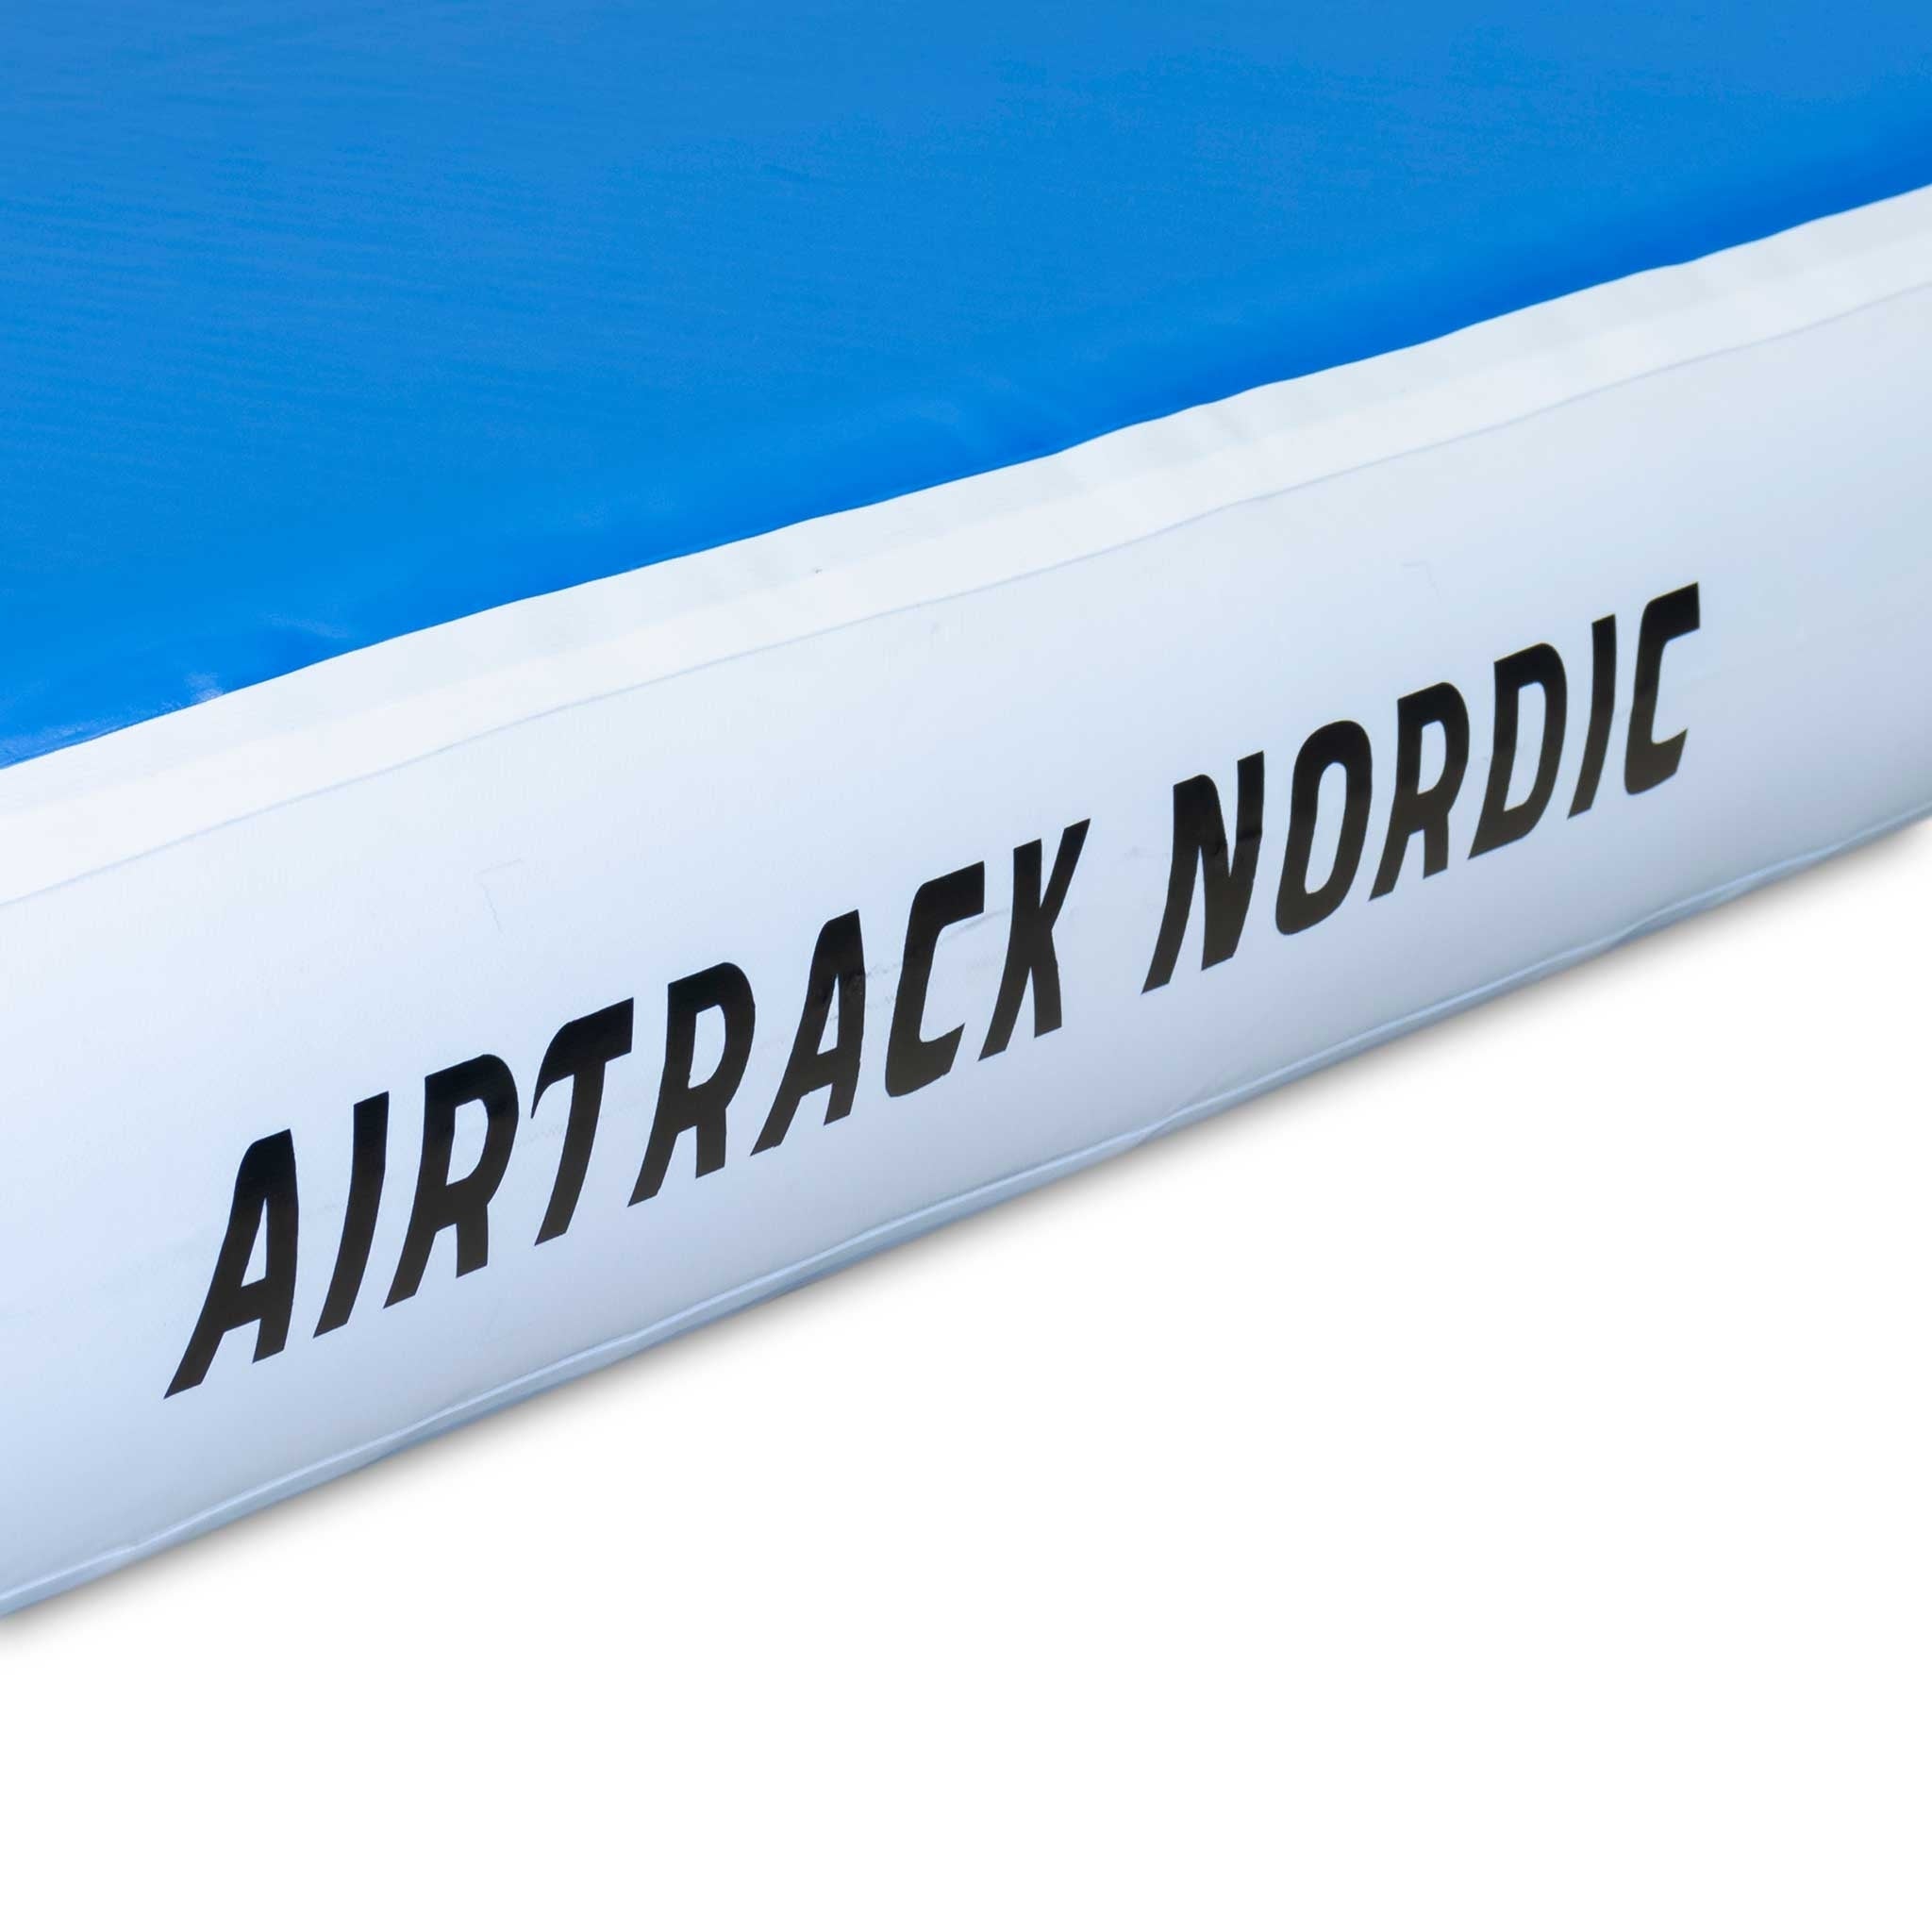 AirMat Nordic AirBlock - Free Standard Delivery - 249.00 USD - AirMat Nordic